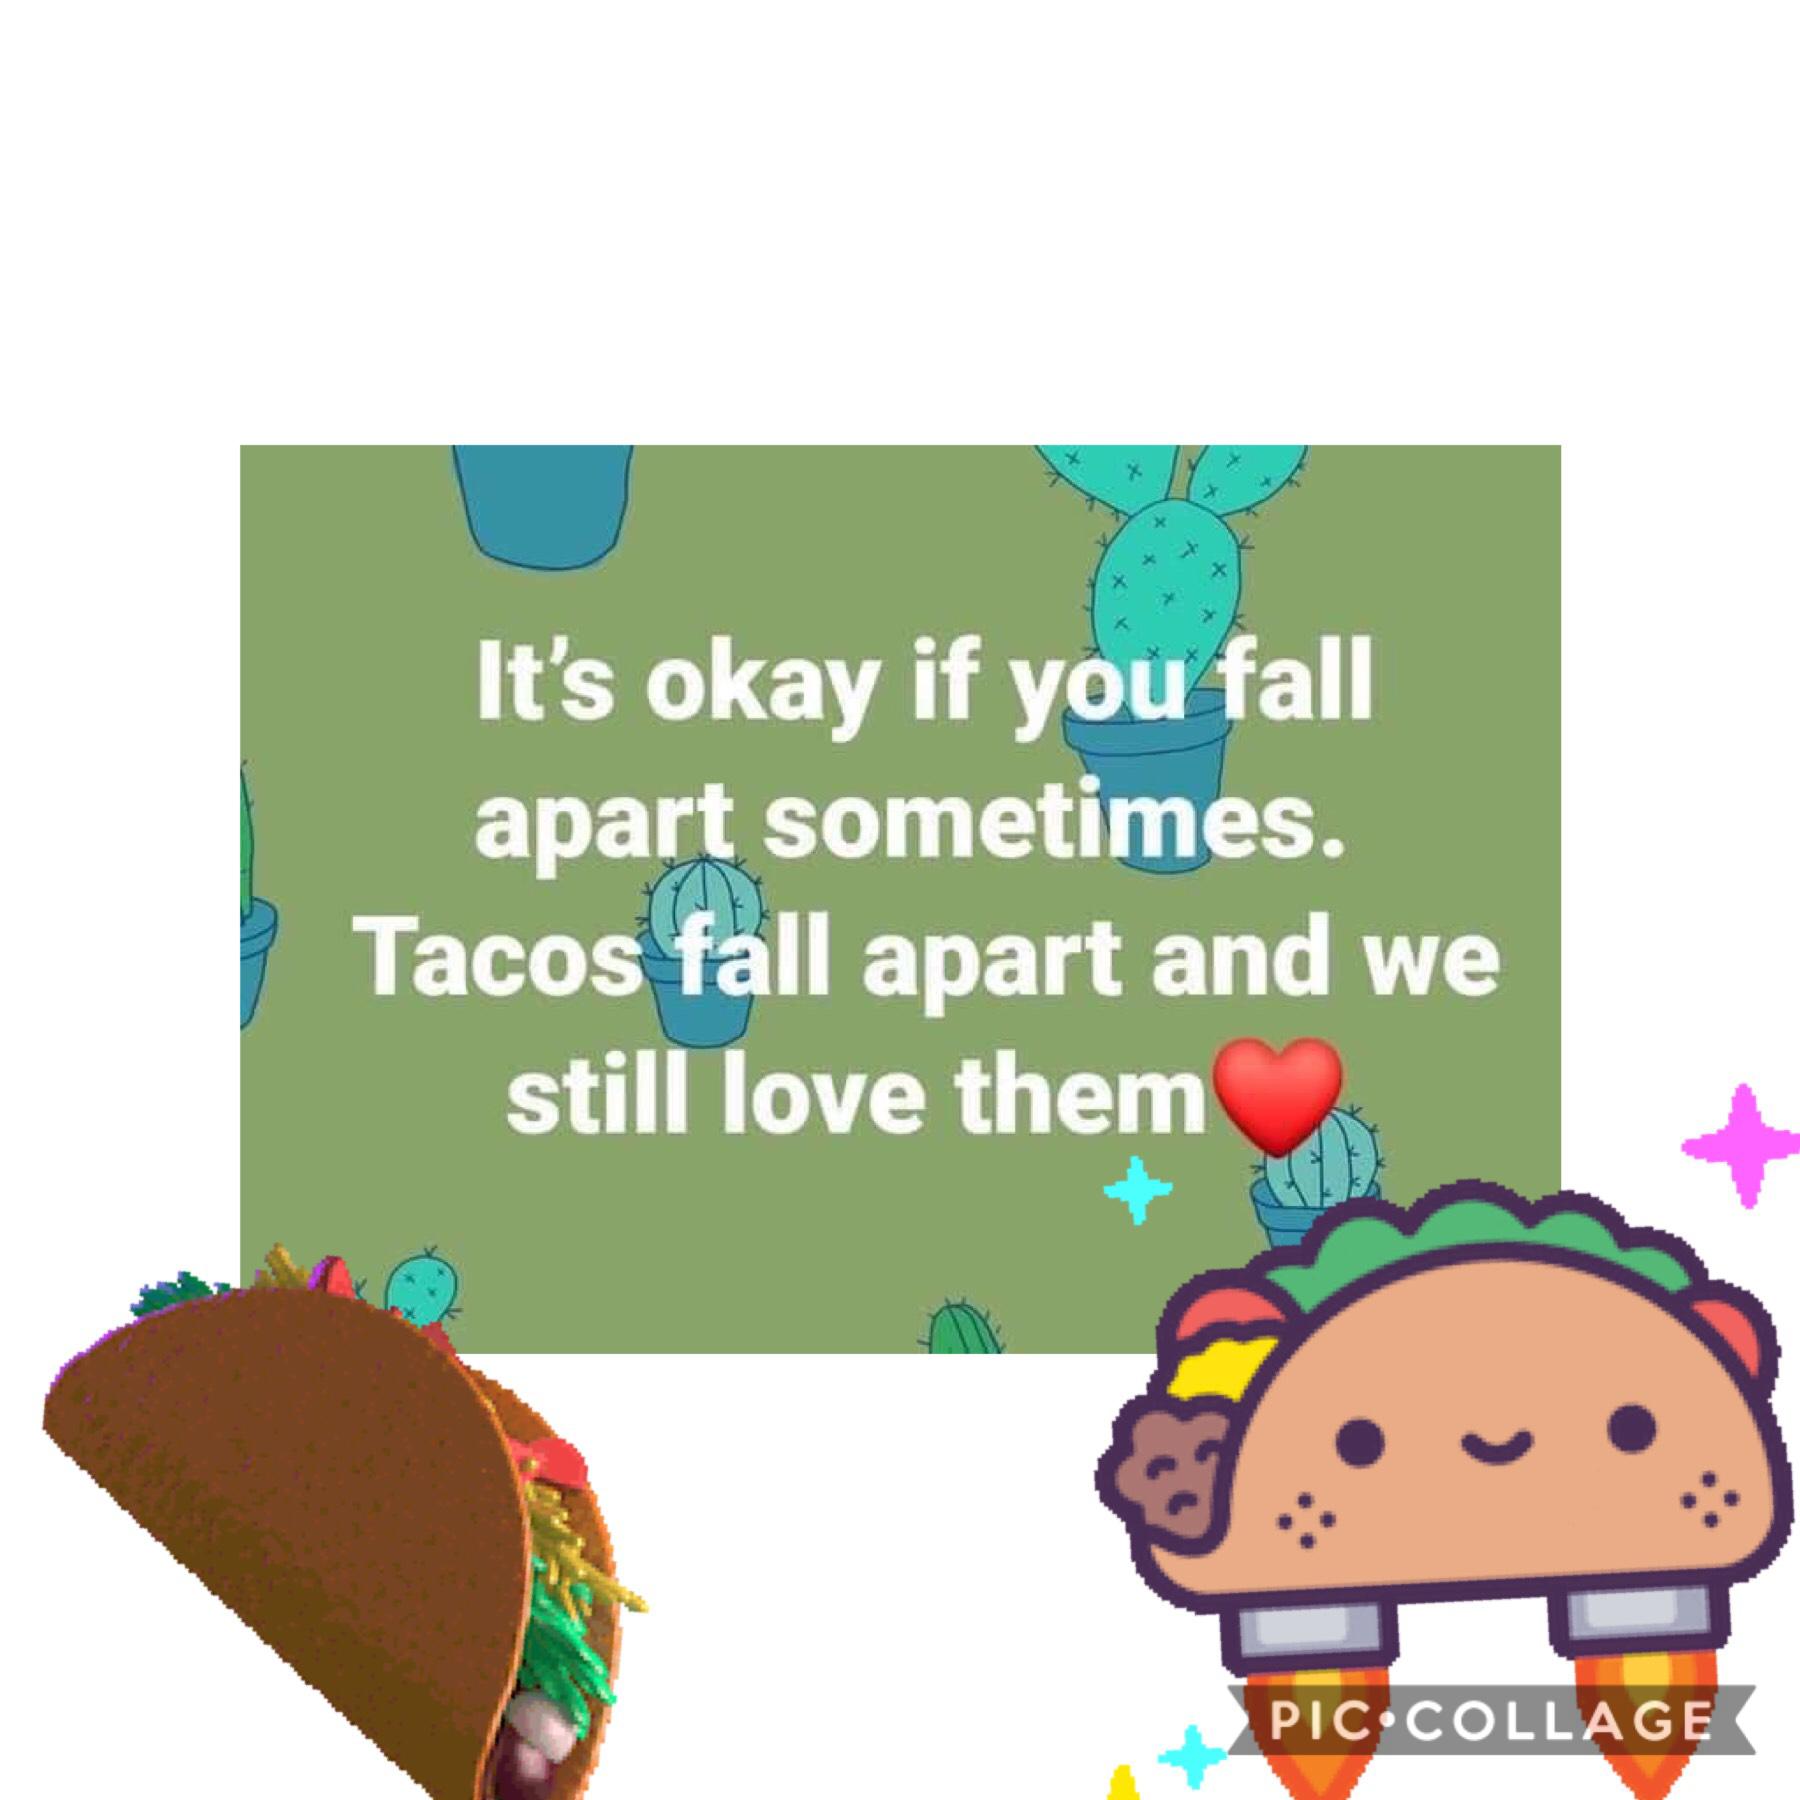 Here are some tacos for you 🌮 